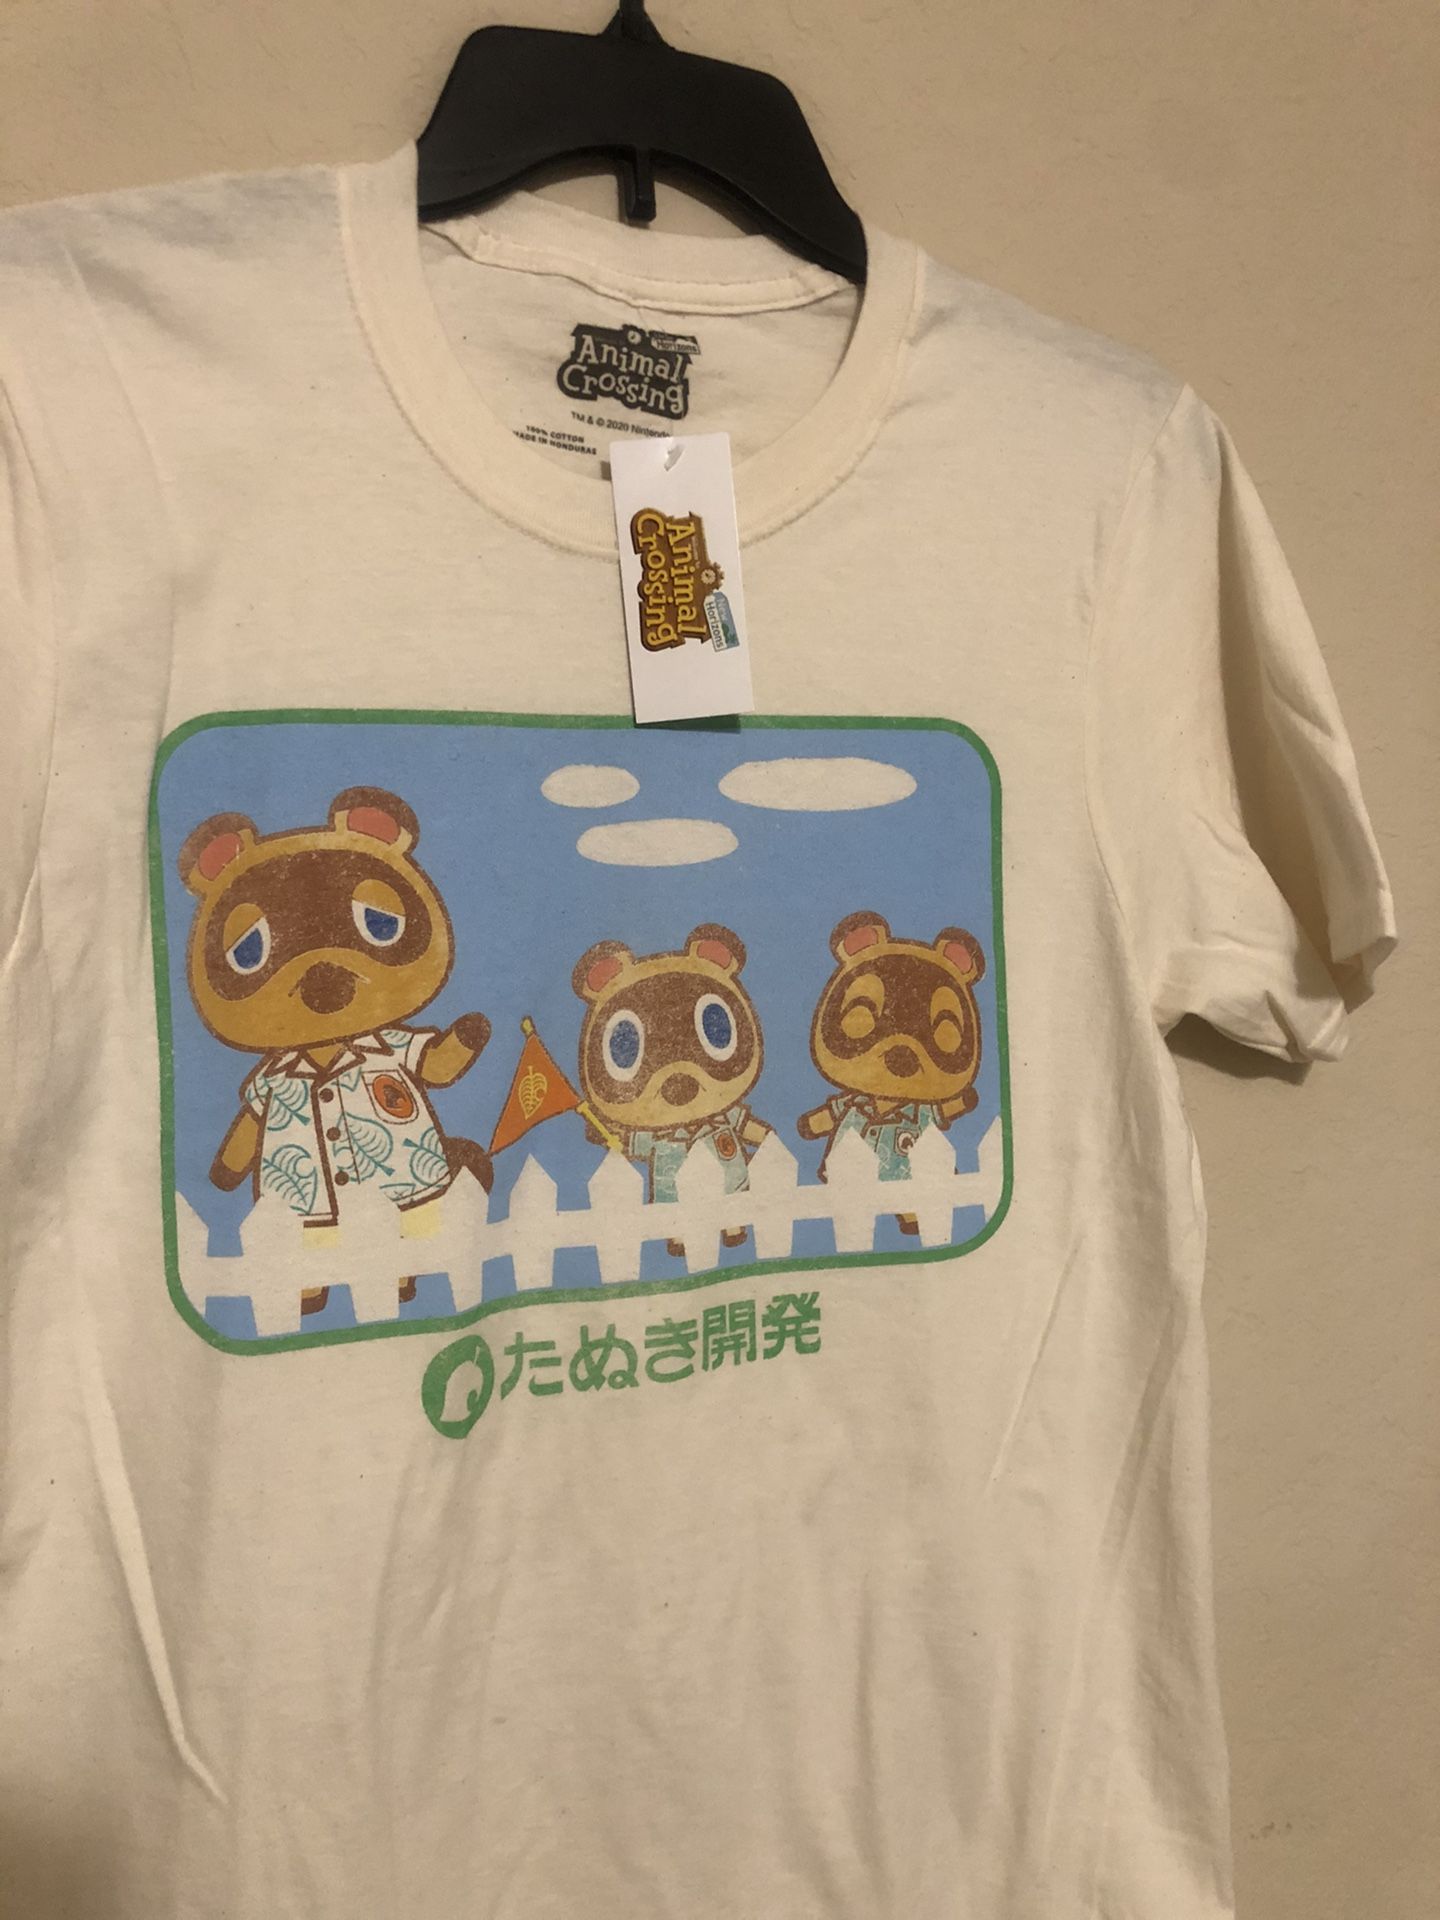 Exclusive official Animal Crossing March [Size: S-M]